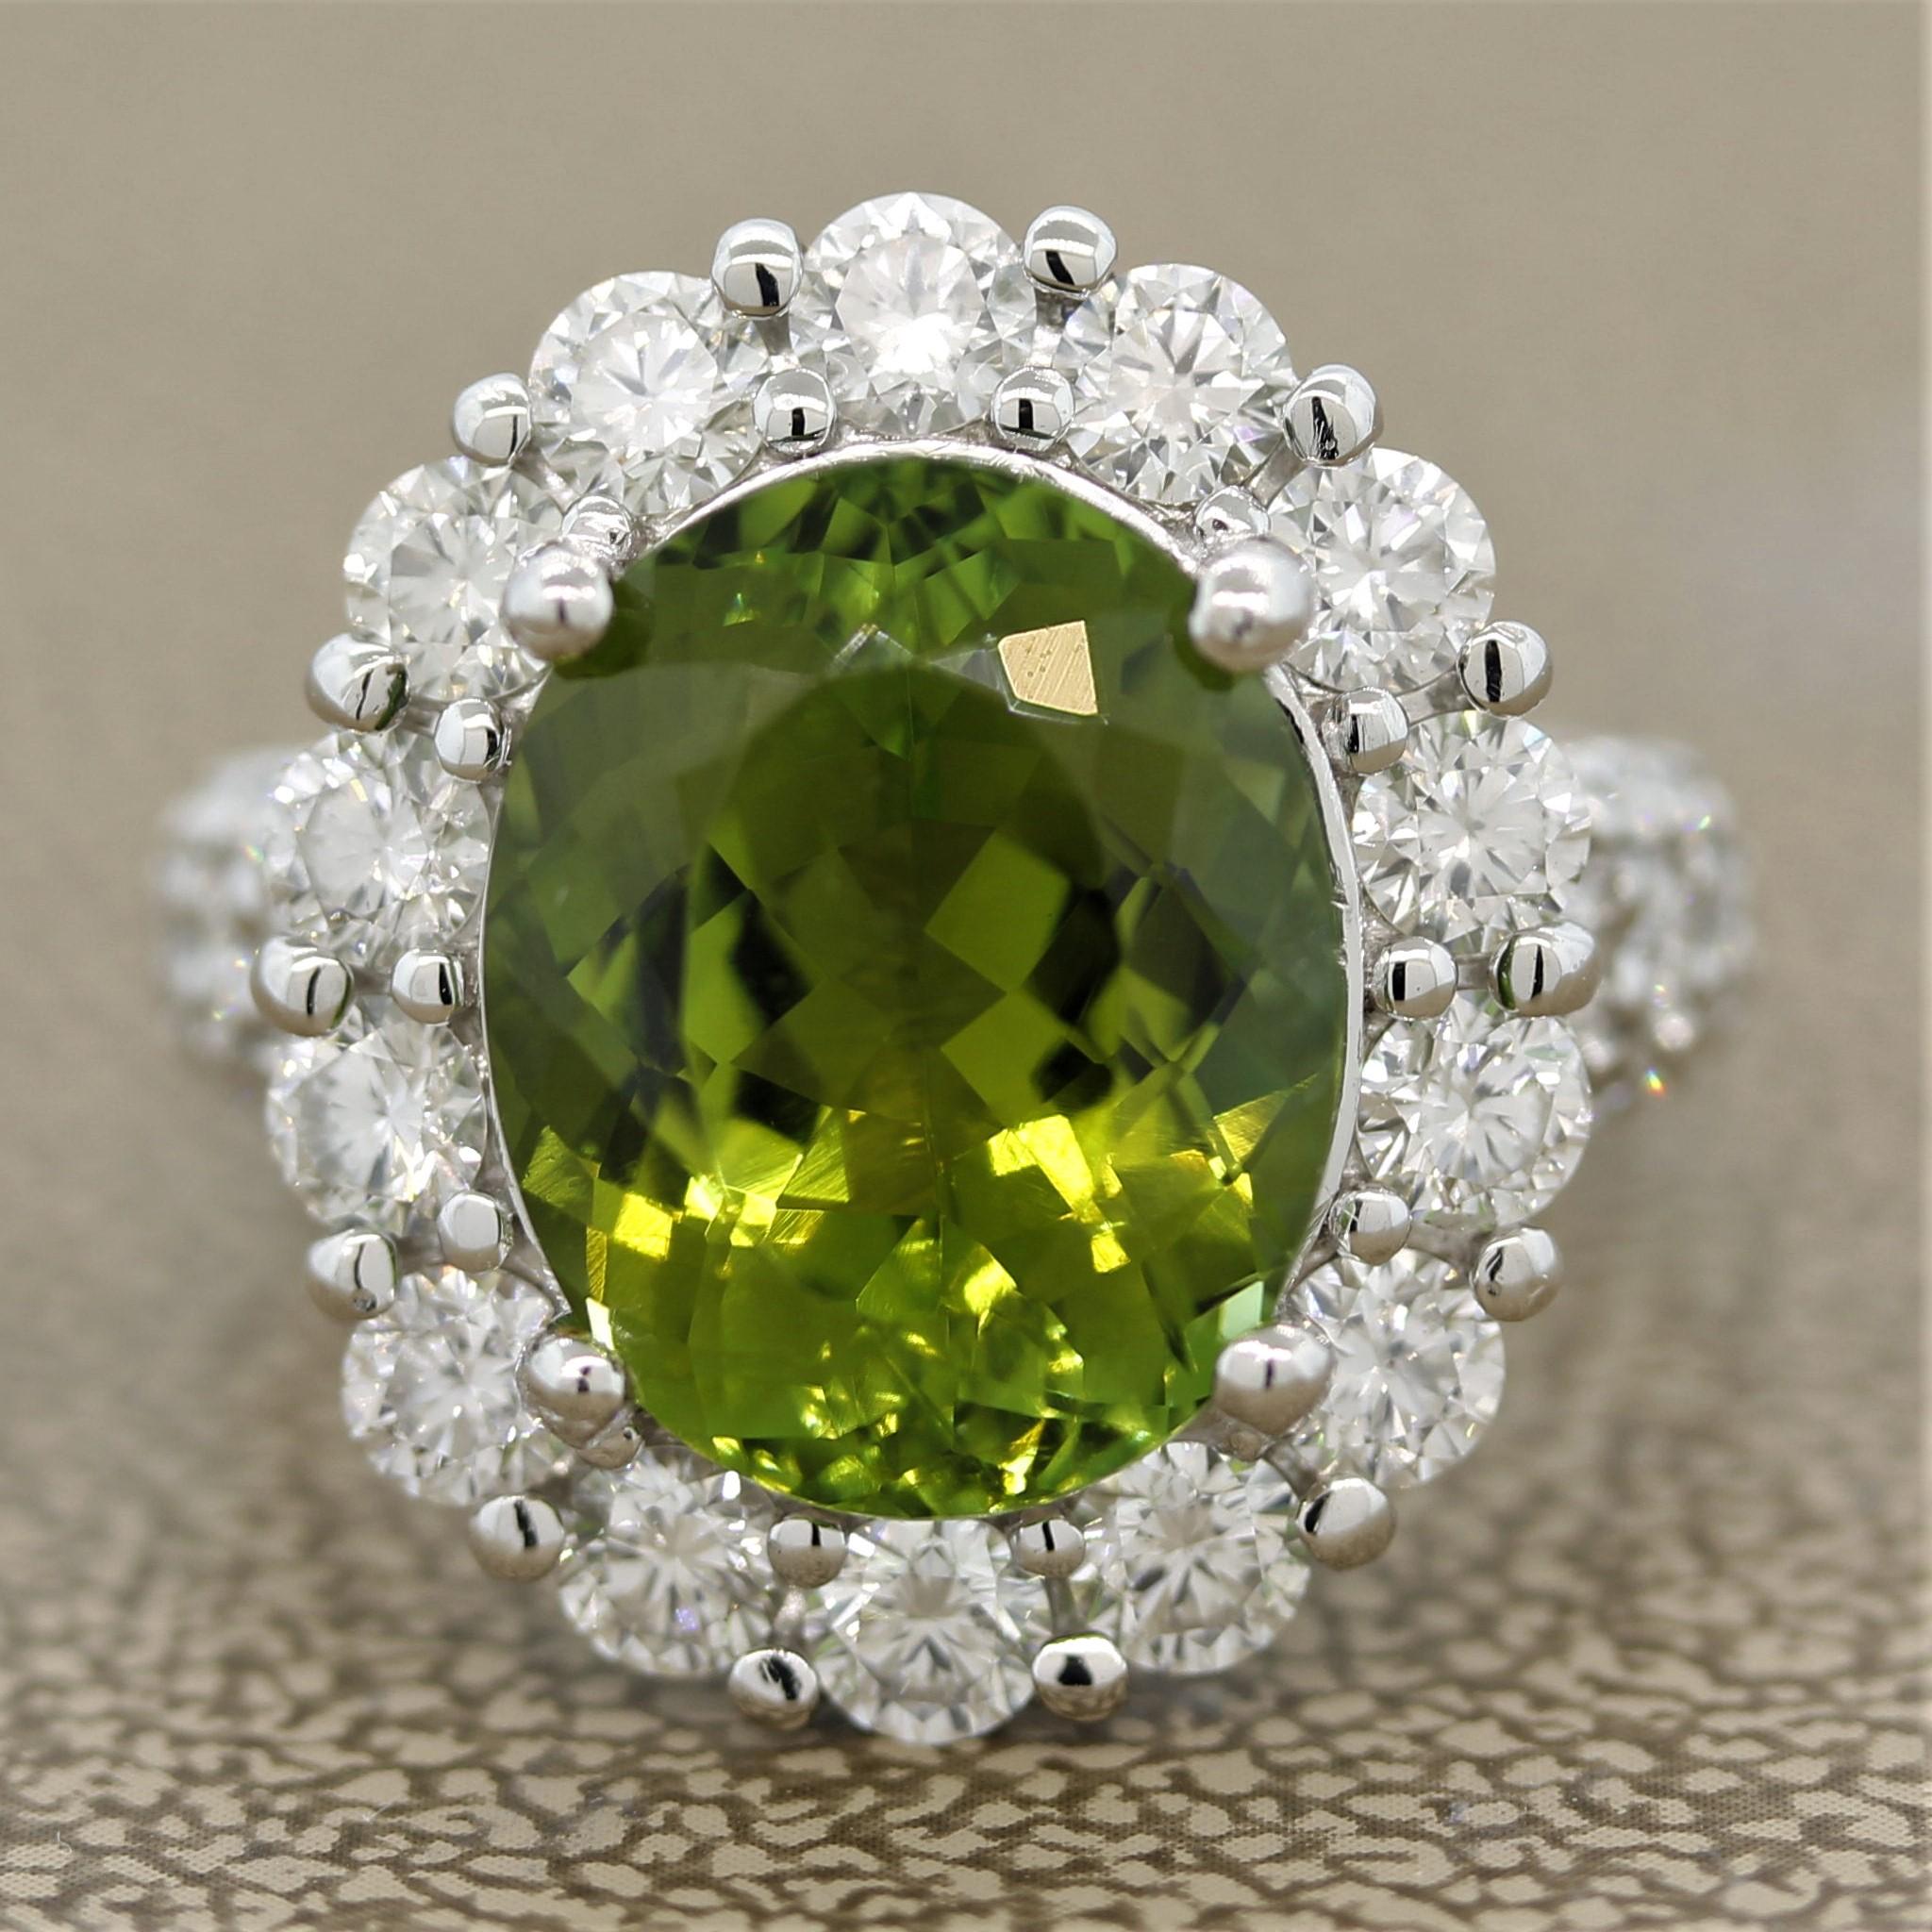 A bright and lively green tourmaline! It weighs 6.13 carats and is cut as an oval shape with a bright sharp green color. It is accented by 1.95 carats of fine round brilliant cut diamonds which halo the tourmaline and run down the sides of the ring.